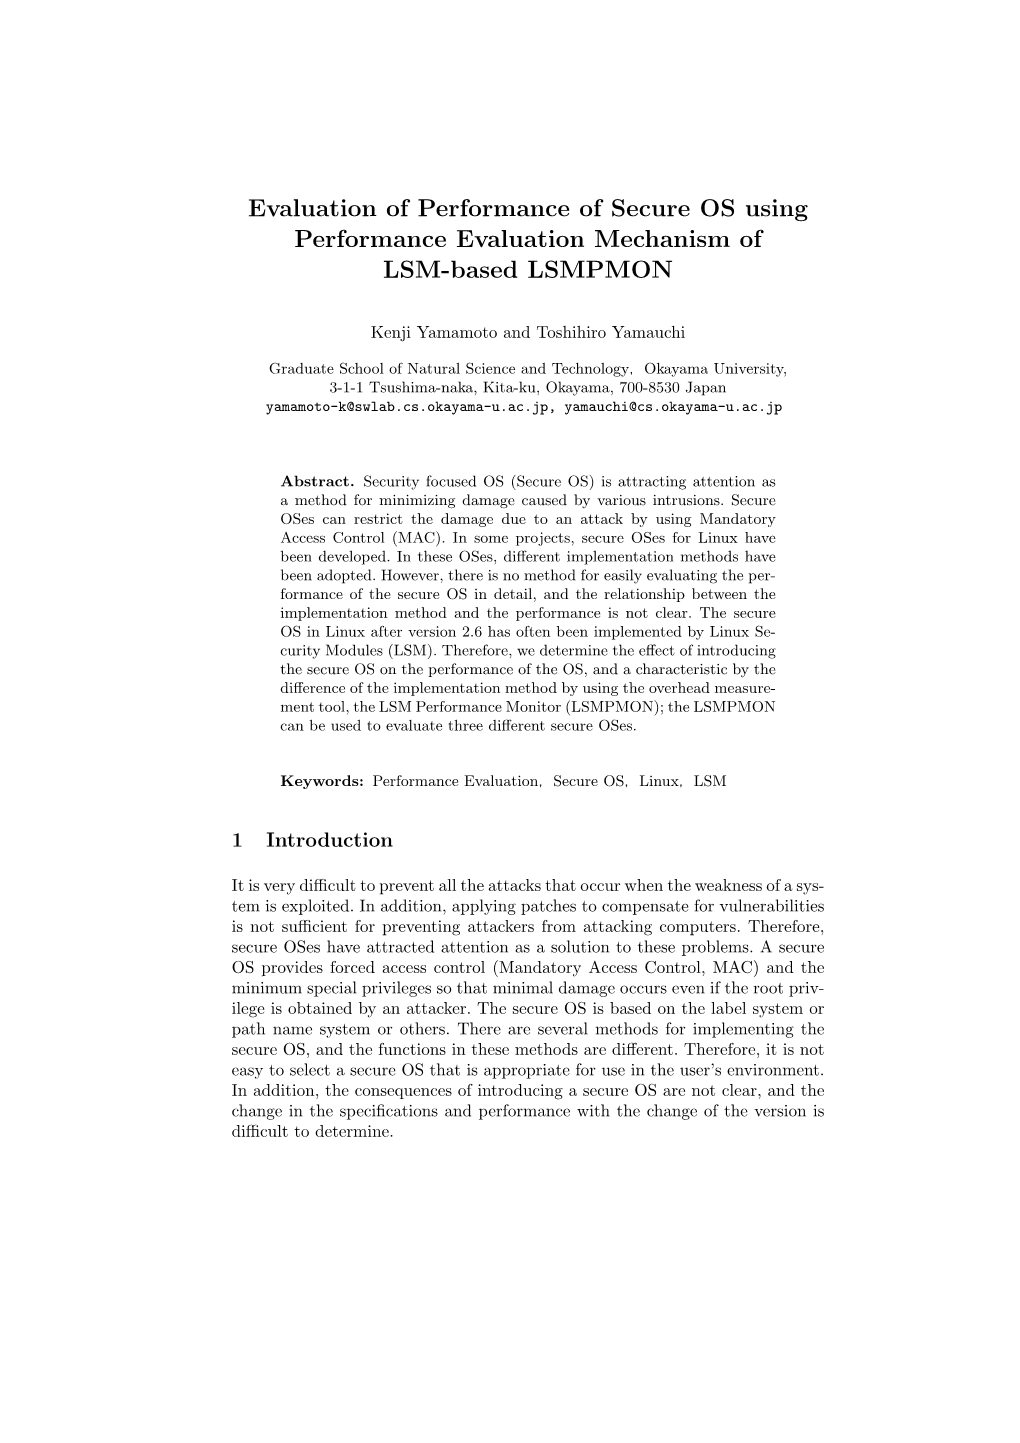 Evaluation of Performance of Secure OS Using Performance Evaluation Mechanism of LSM-Based LSMPMON